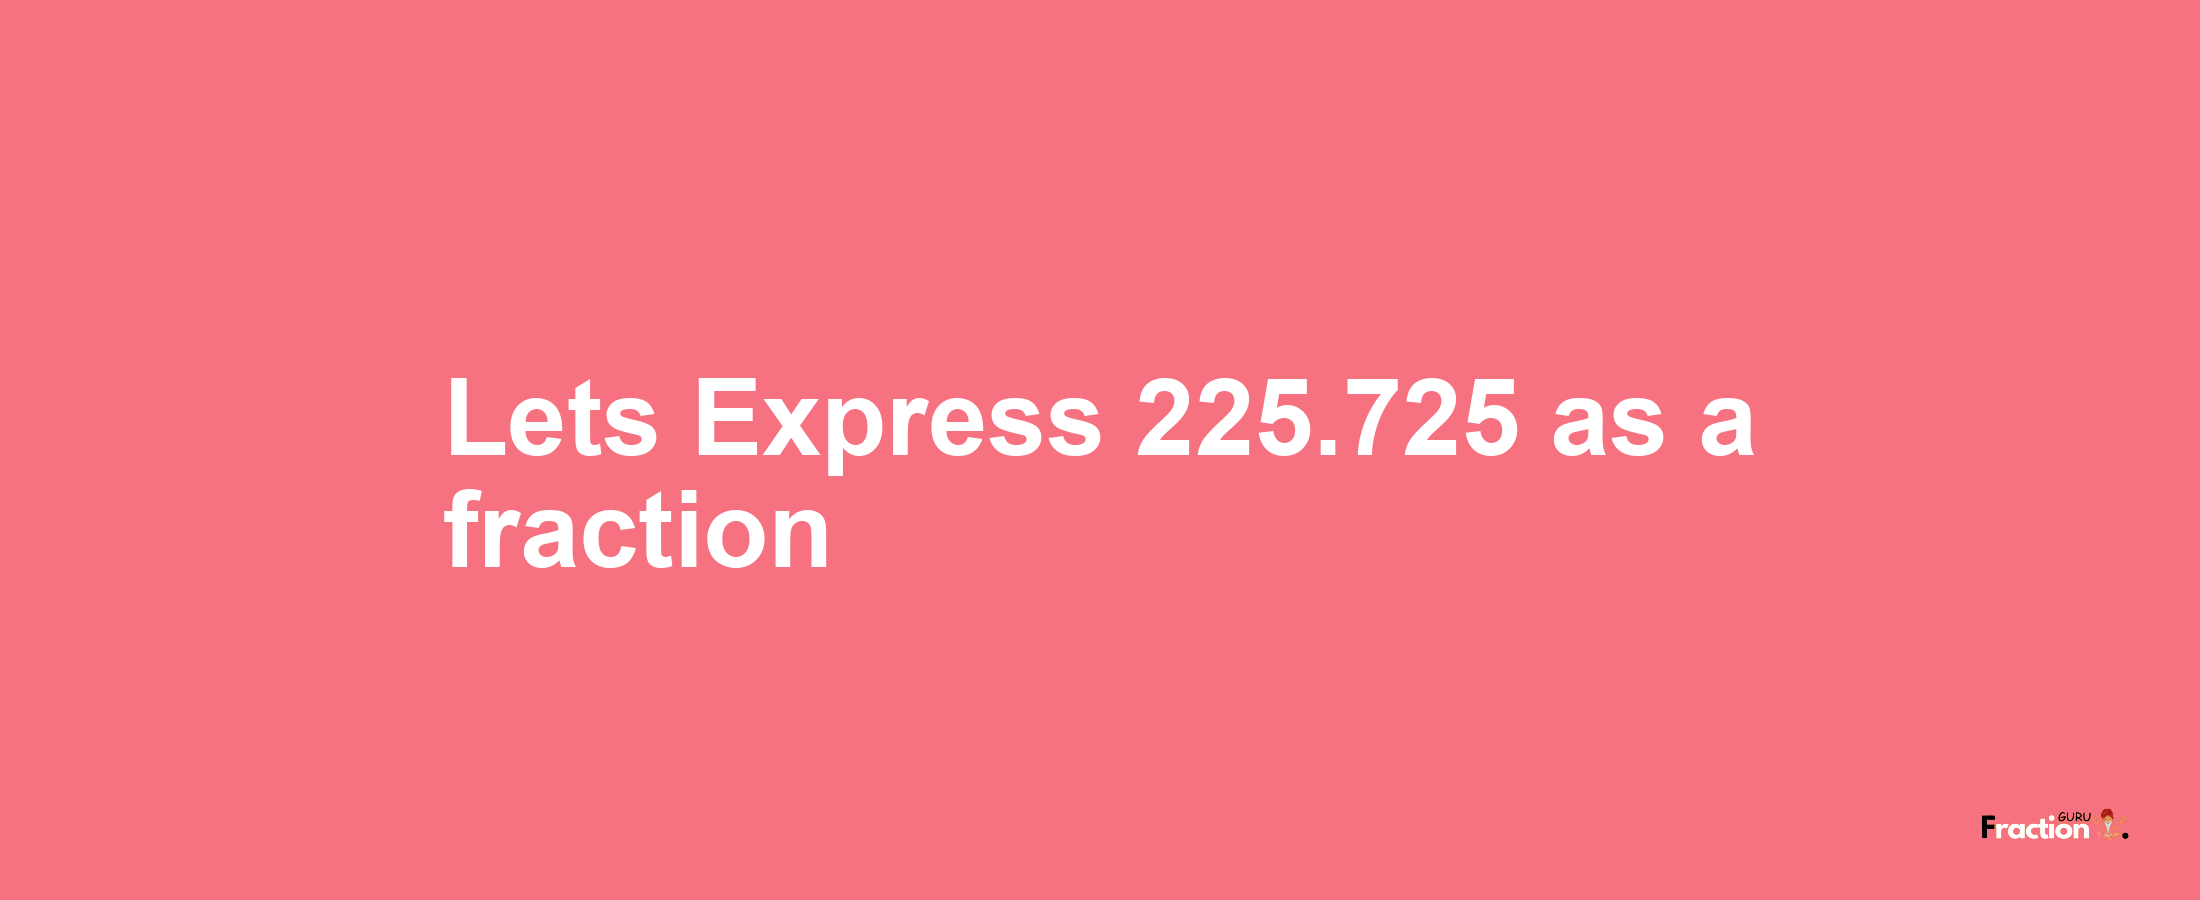 Lets Express 225.725 as afraction